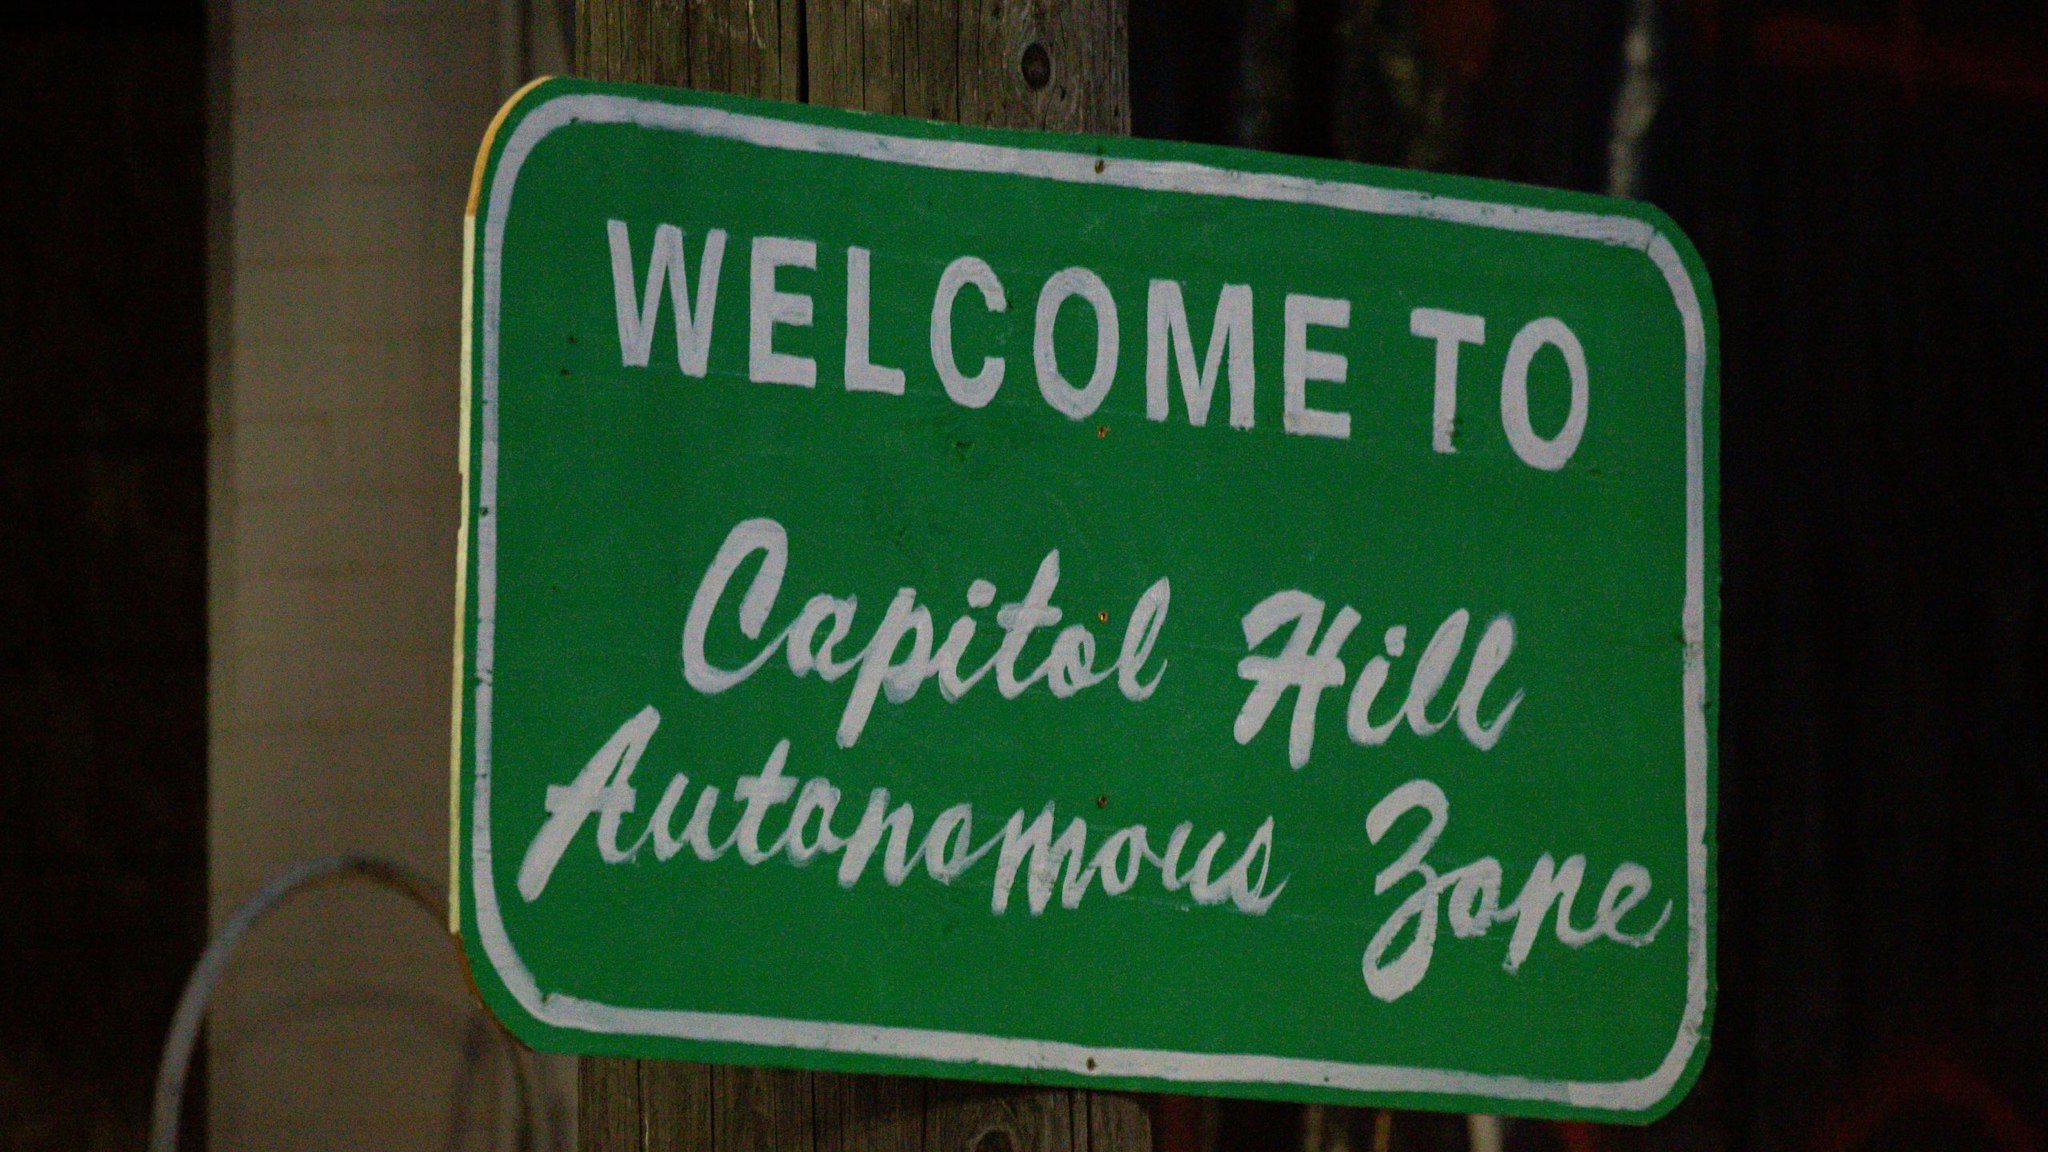 SEATTLE, WA - JUNE 10: A sign welcomes visitors to the so-called "Capitol Hill Autonomous Zone" on June 10, 2020 in Seattle, Washington. The zone includes the blocks surrounding the Seattle Police Departments East Precinct, which was the site of violent clashes with Black Lives Matter protesters, who have continued to demonstrate in the wake of George Floyds death. (Photo by David Ryder/Getty Images)